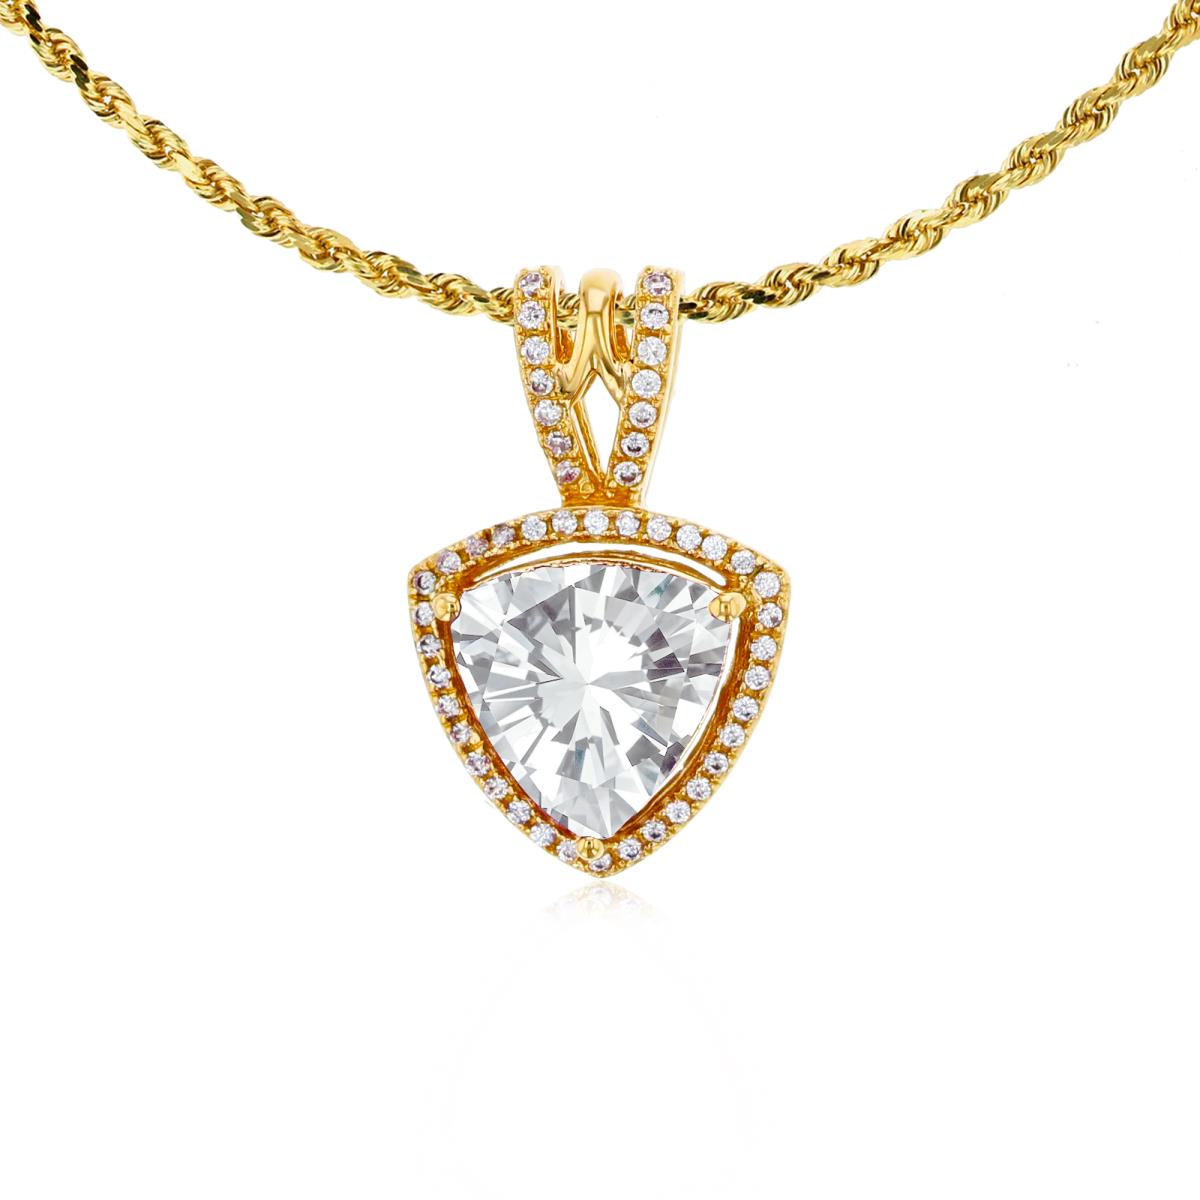 10K Yellow Gold 8mm Trillion White Topaz & 0.13 CTTW Diamonds Frame 18" Rope Chain Necklace